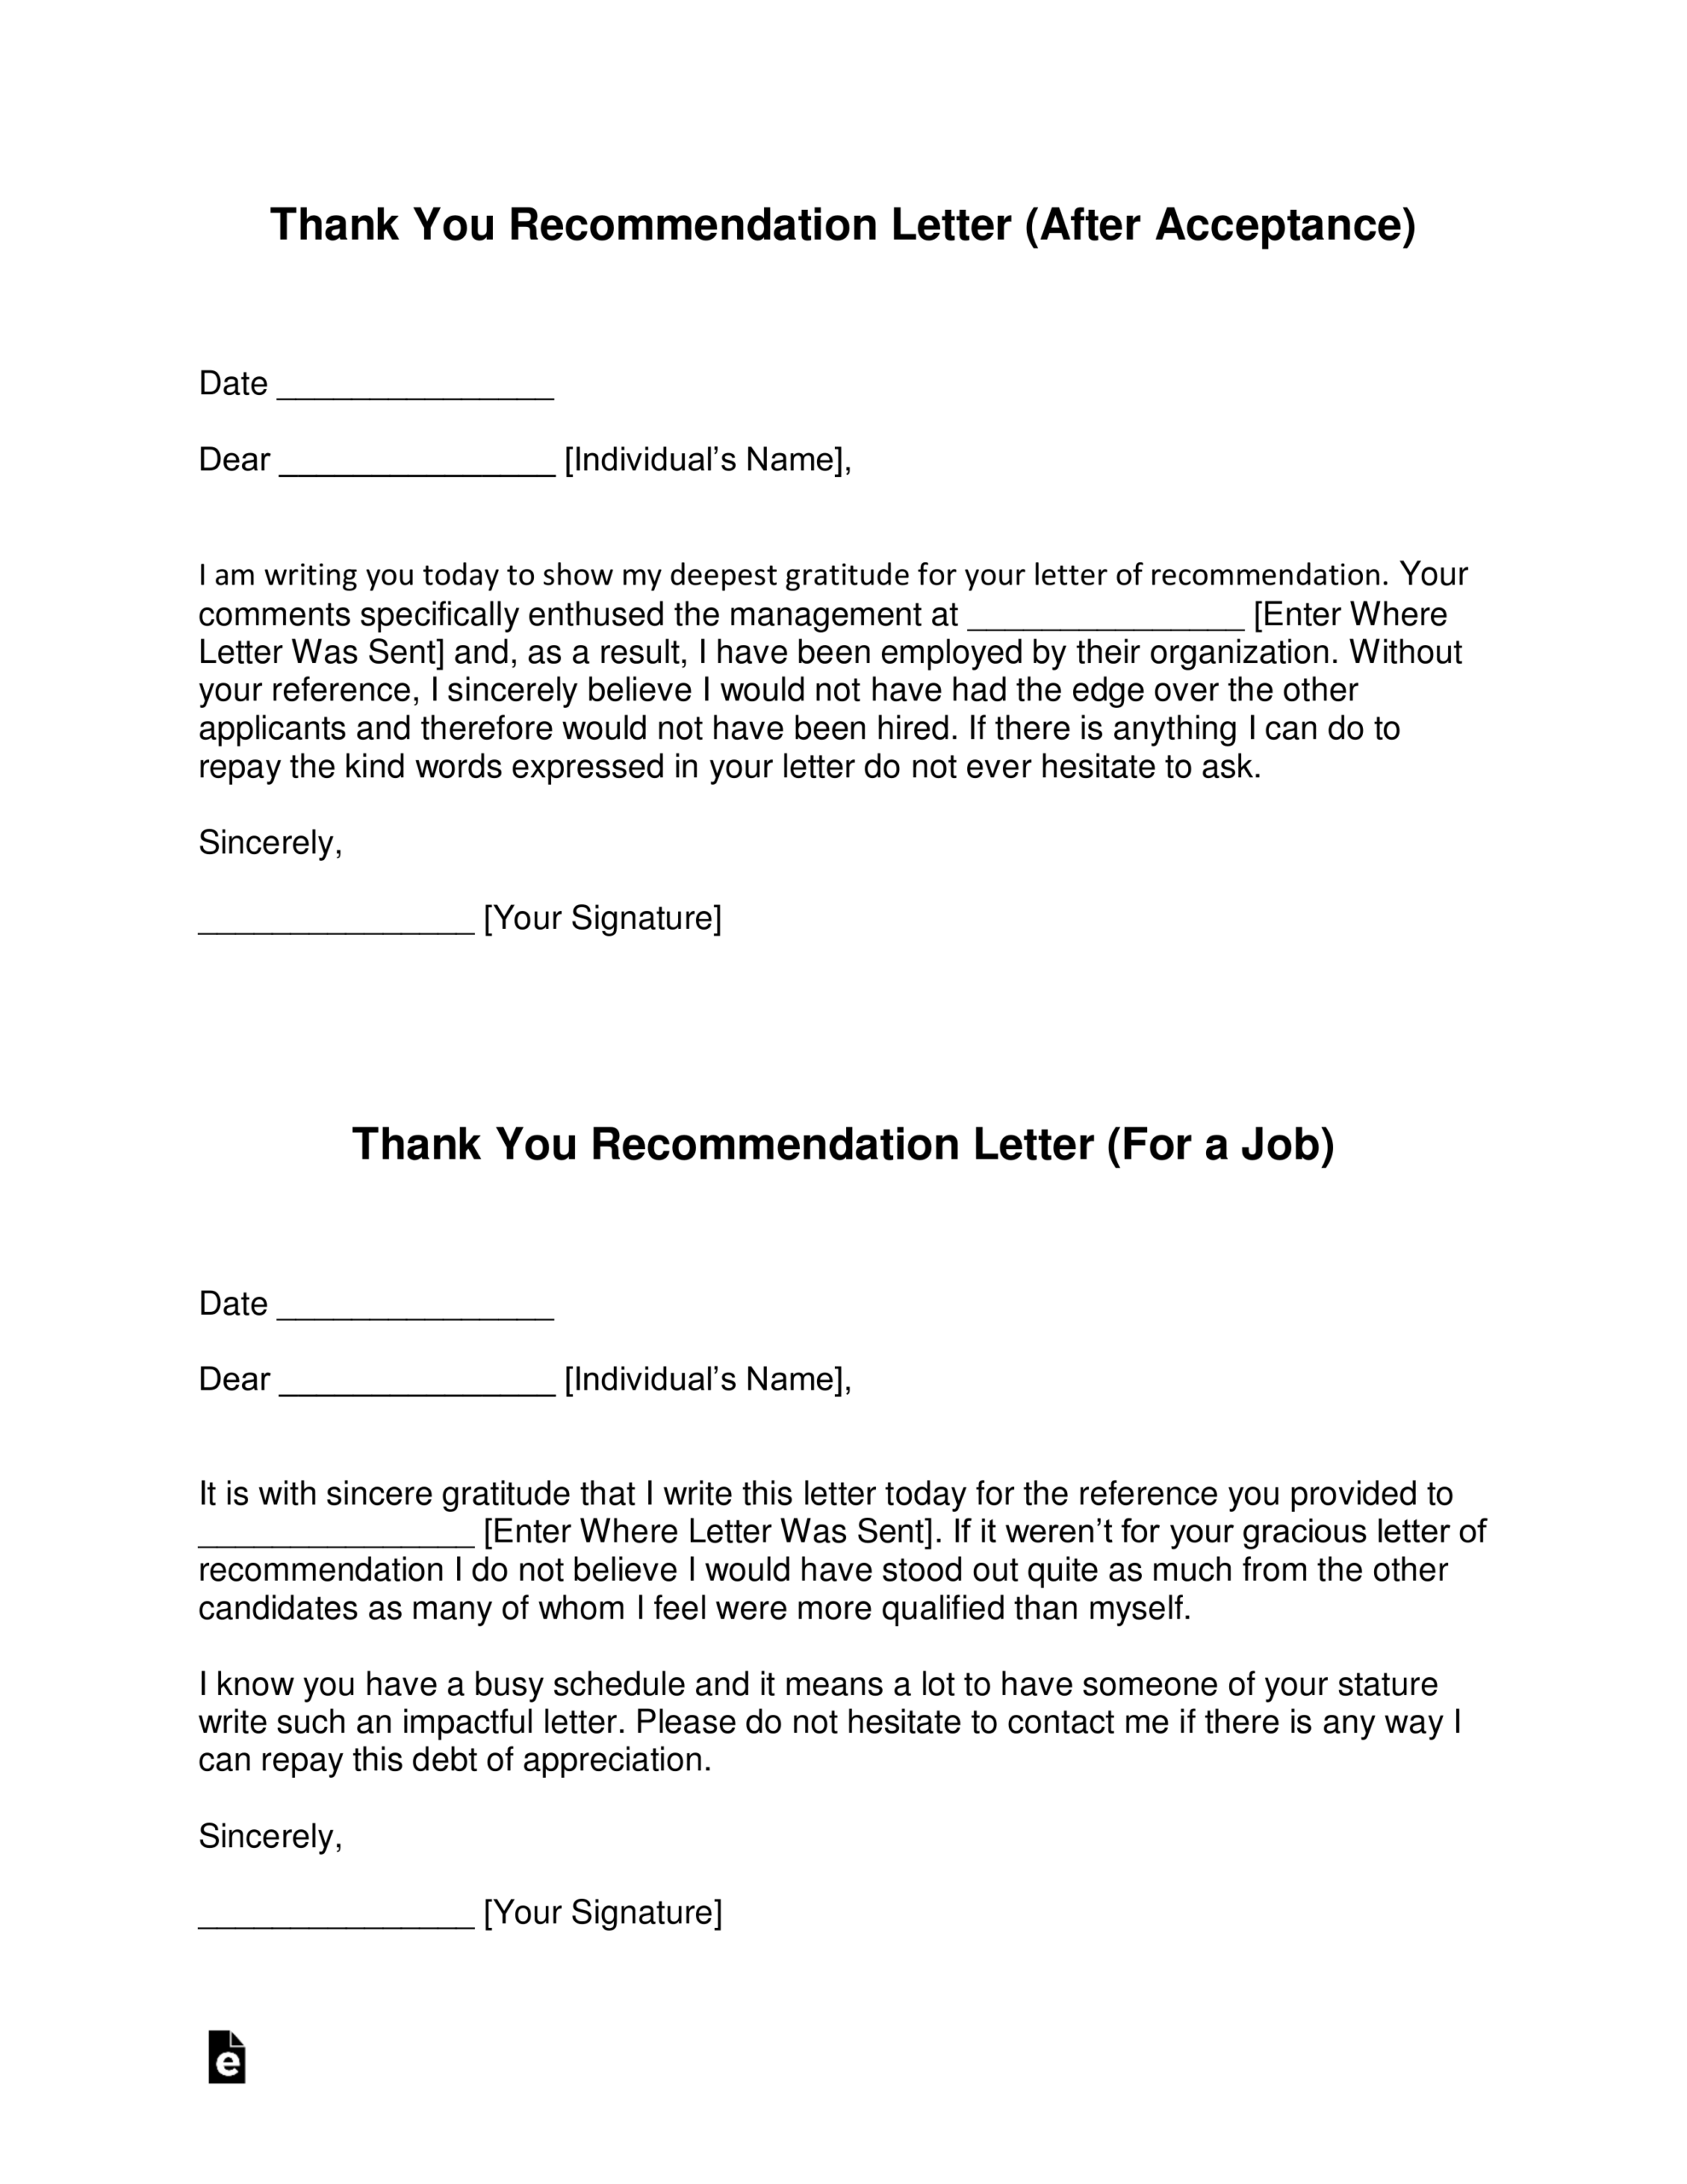 Book Recommendation Letter Sample | Hozzt In Letter Of Recomendation Template